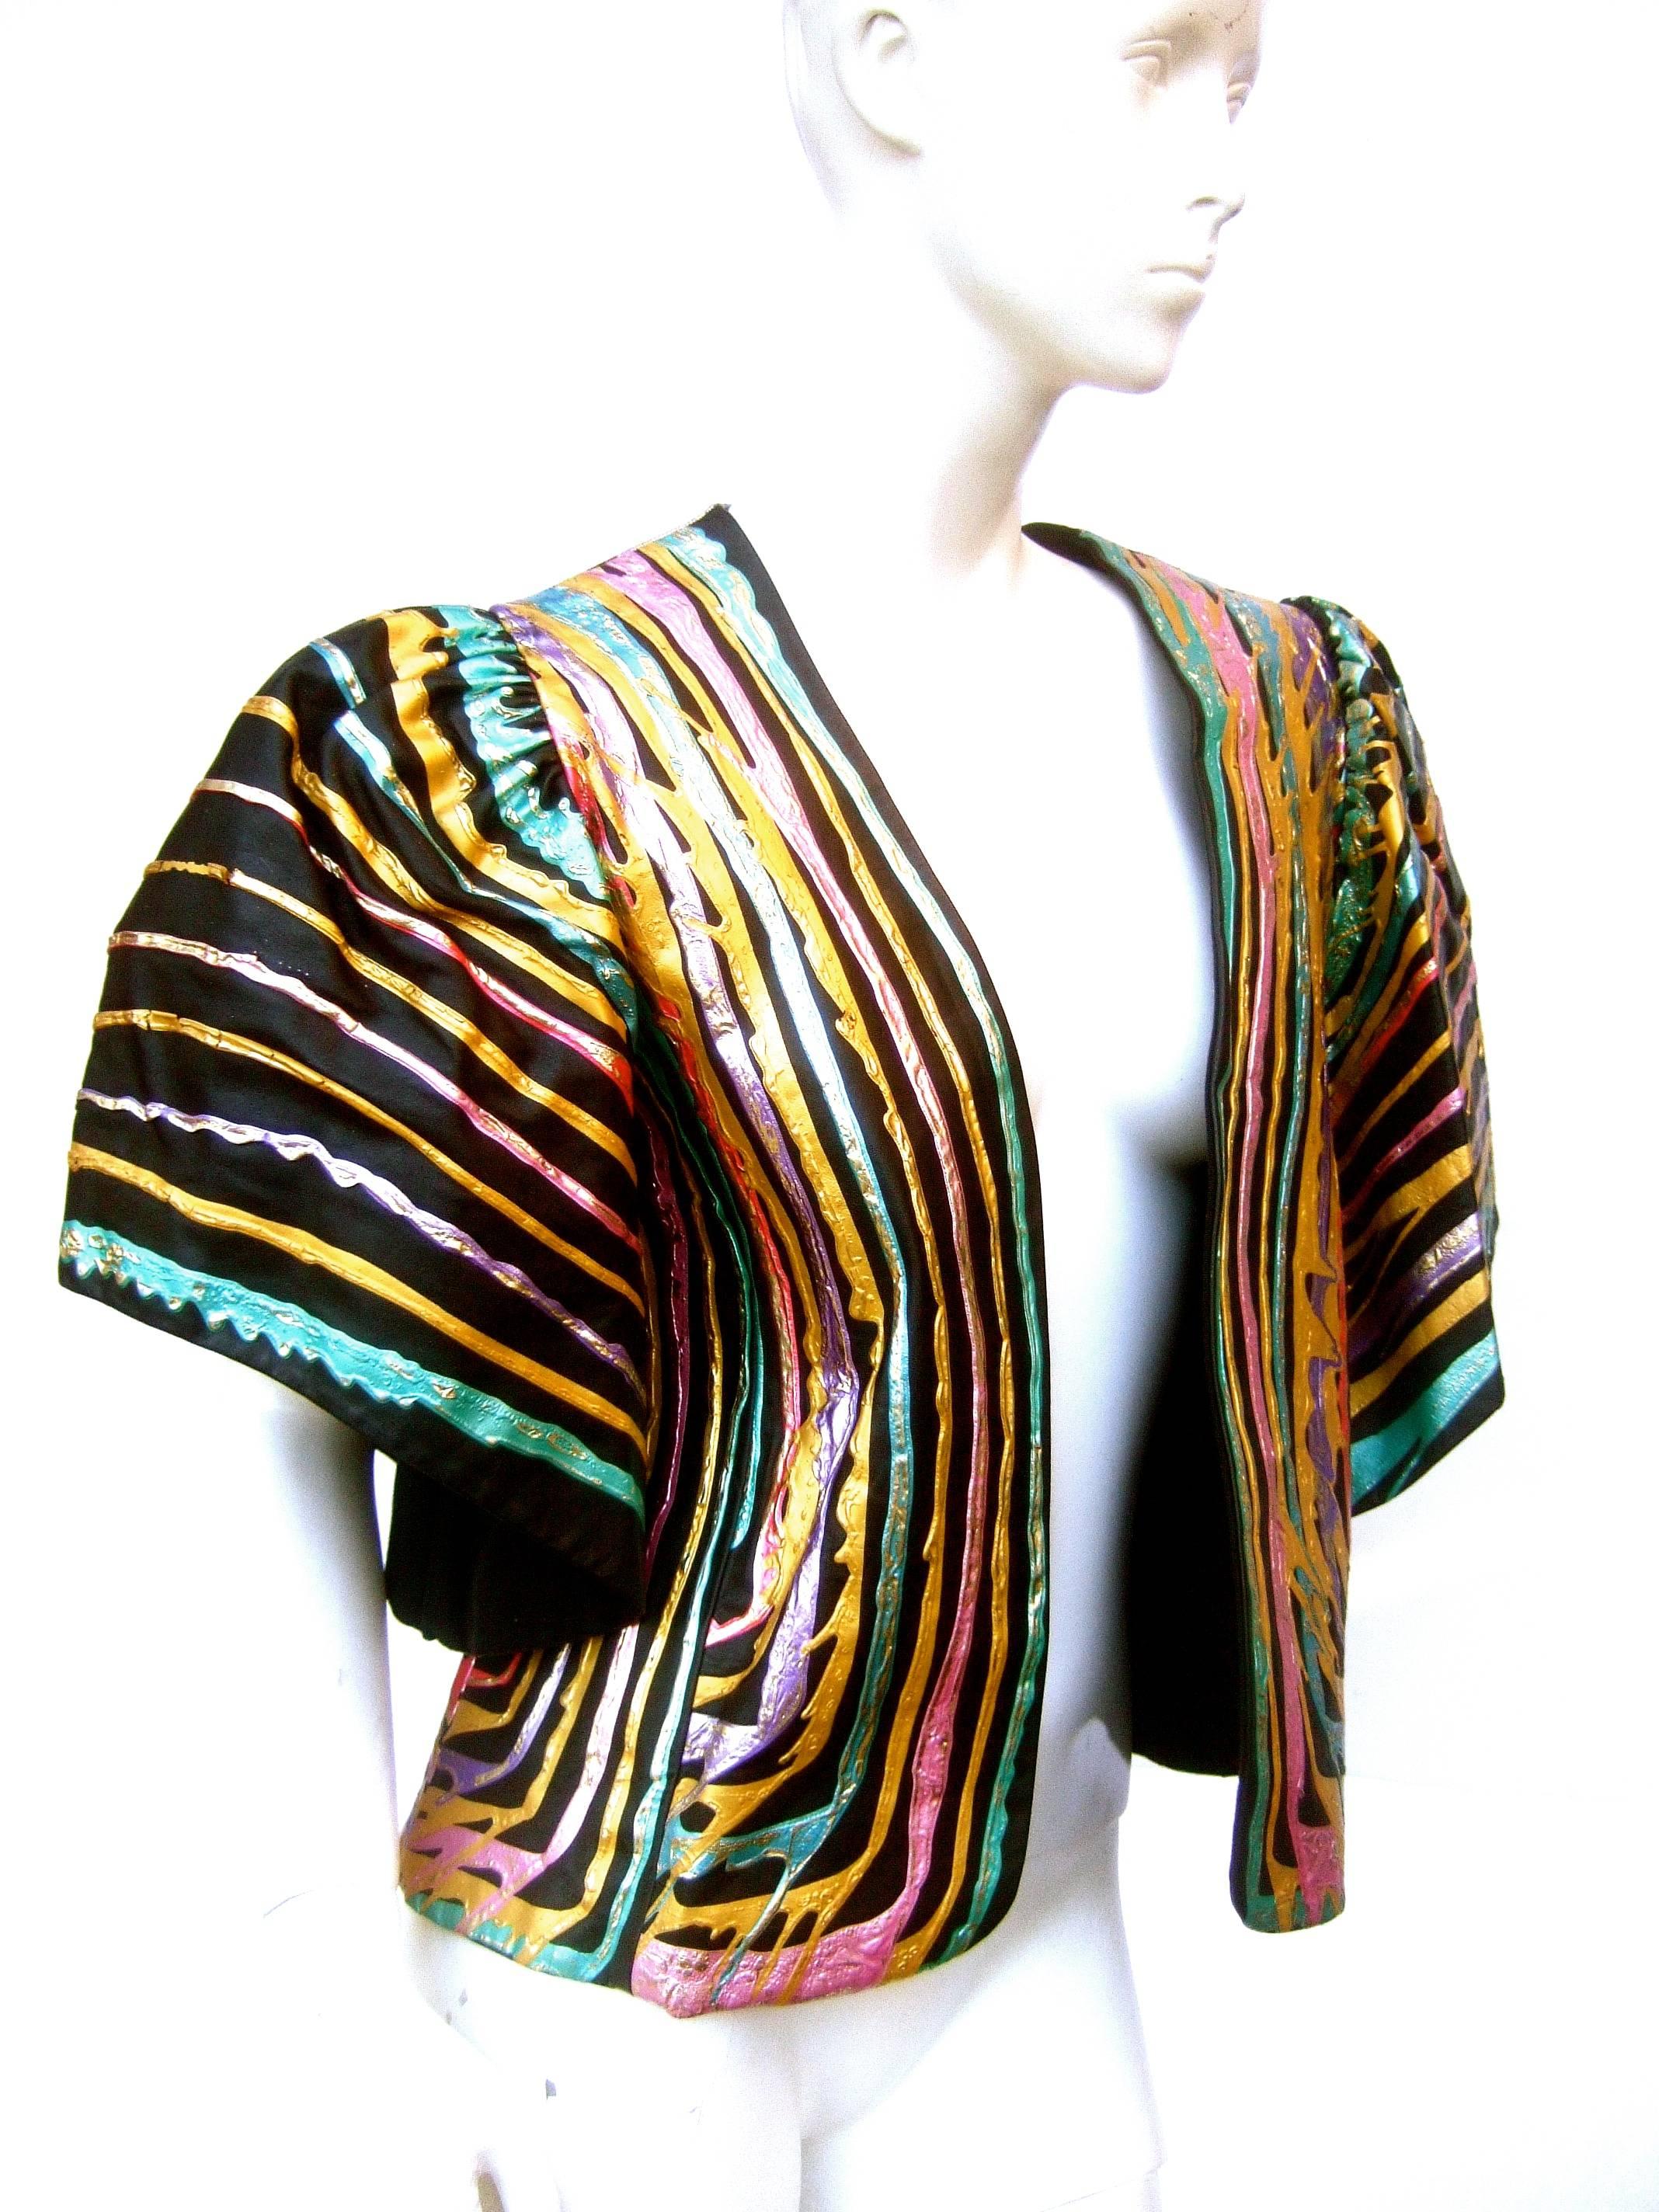 Artisan black leather metallic hand painted jacket c 1980s
The edgy unique leather cropped jacket is designed
with vibrant gold metallic & pastel enamel stripes  
& splatter print graphics on the back side 

The hand painted stripes are